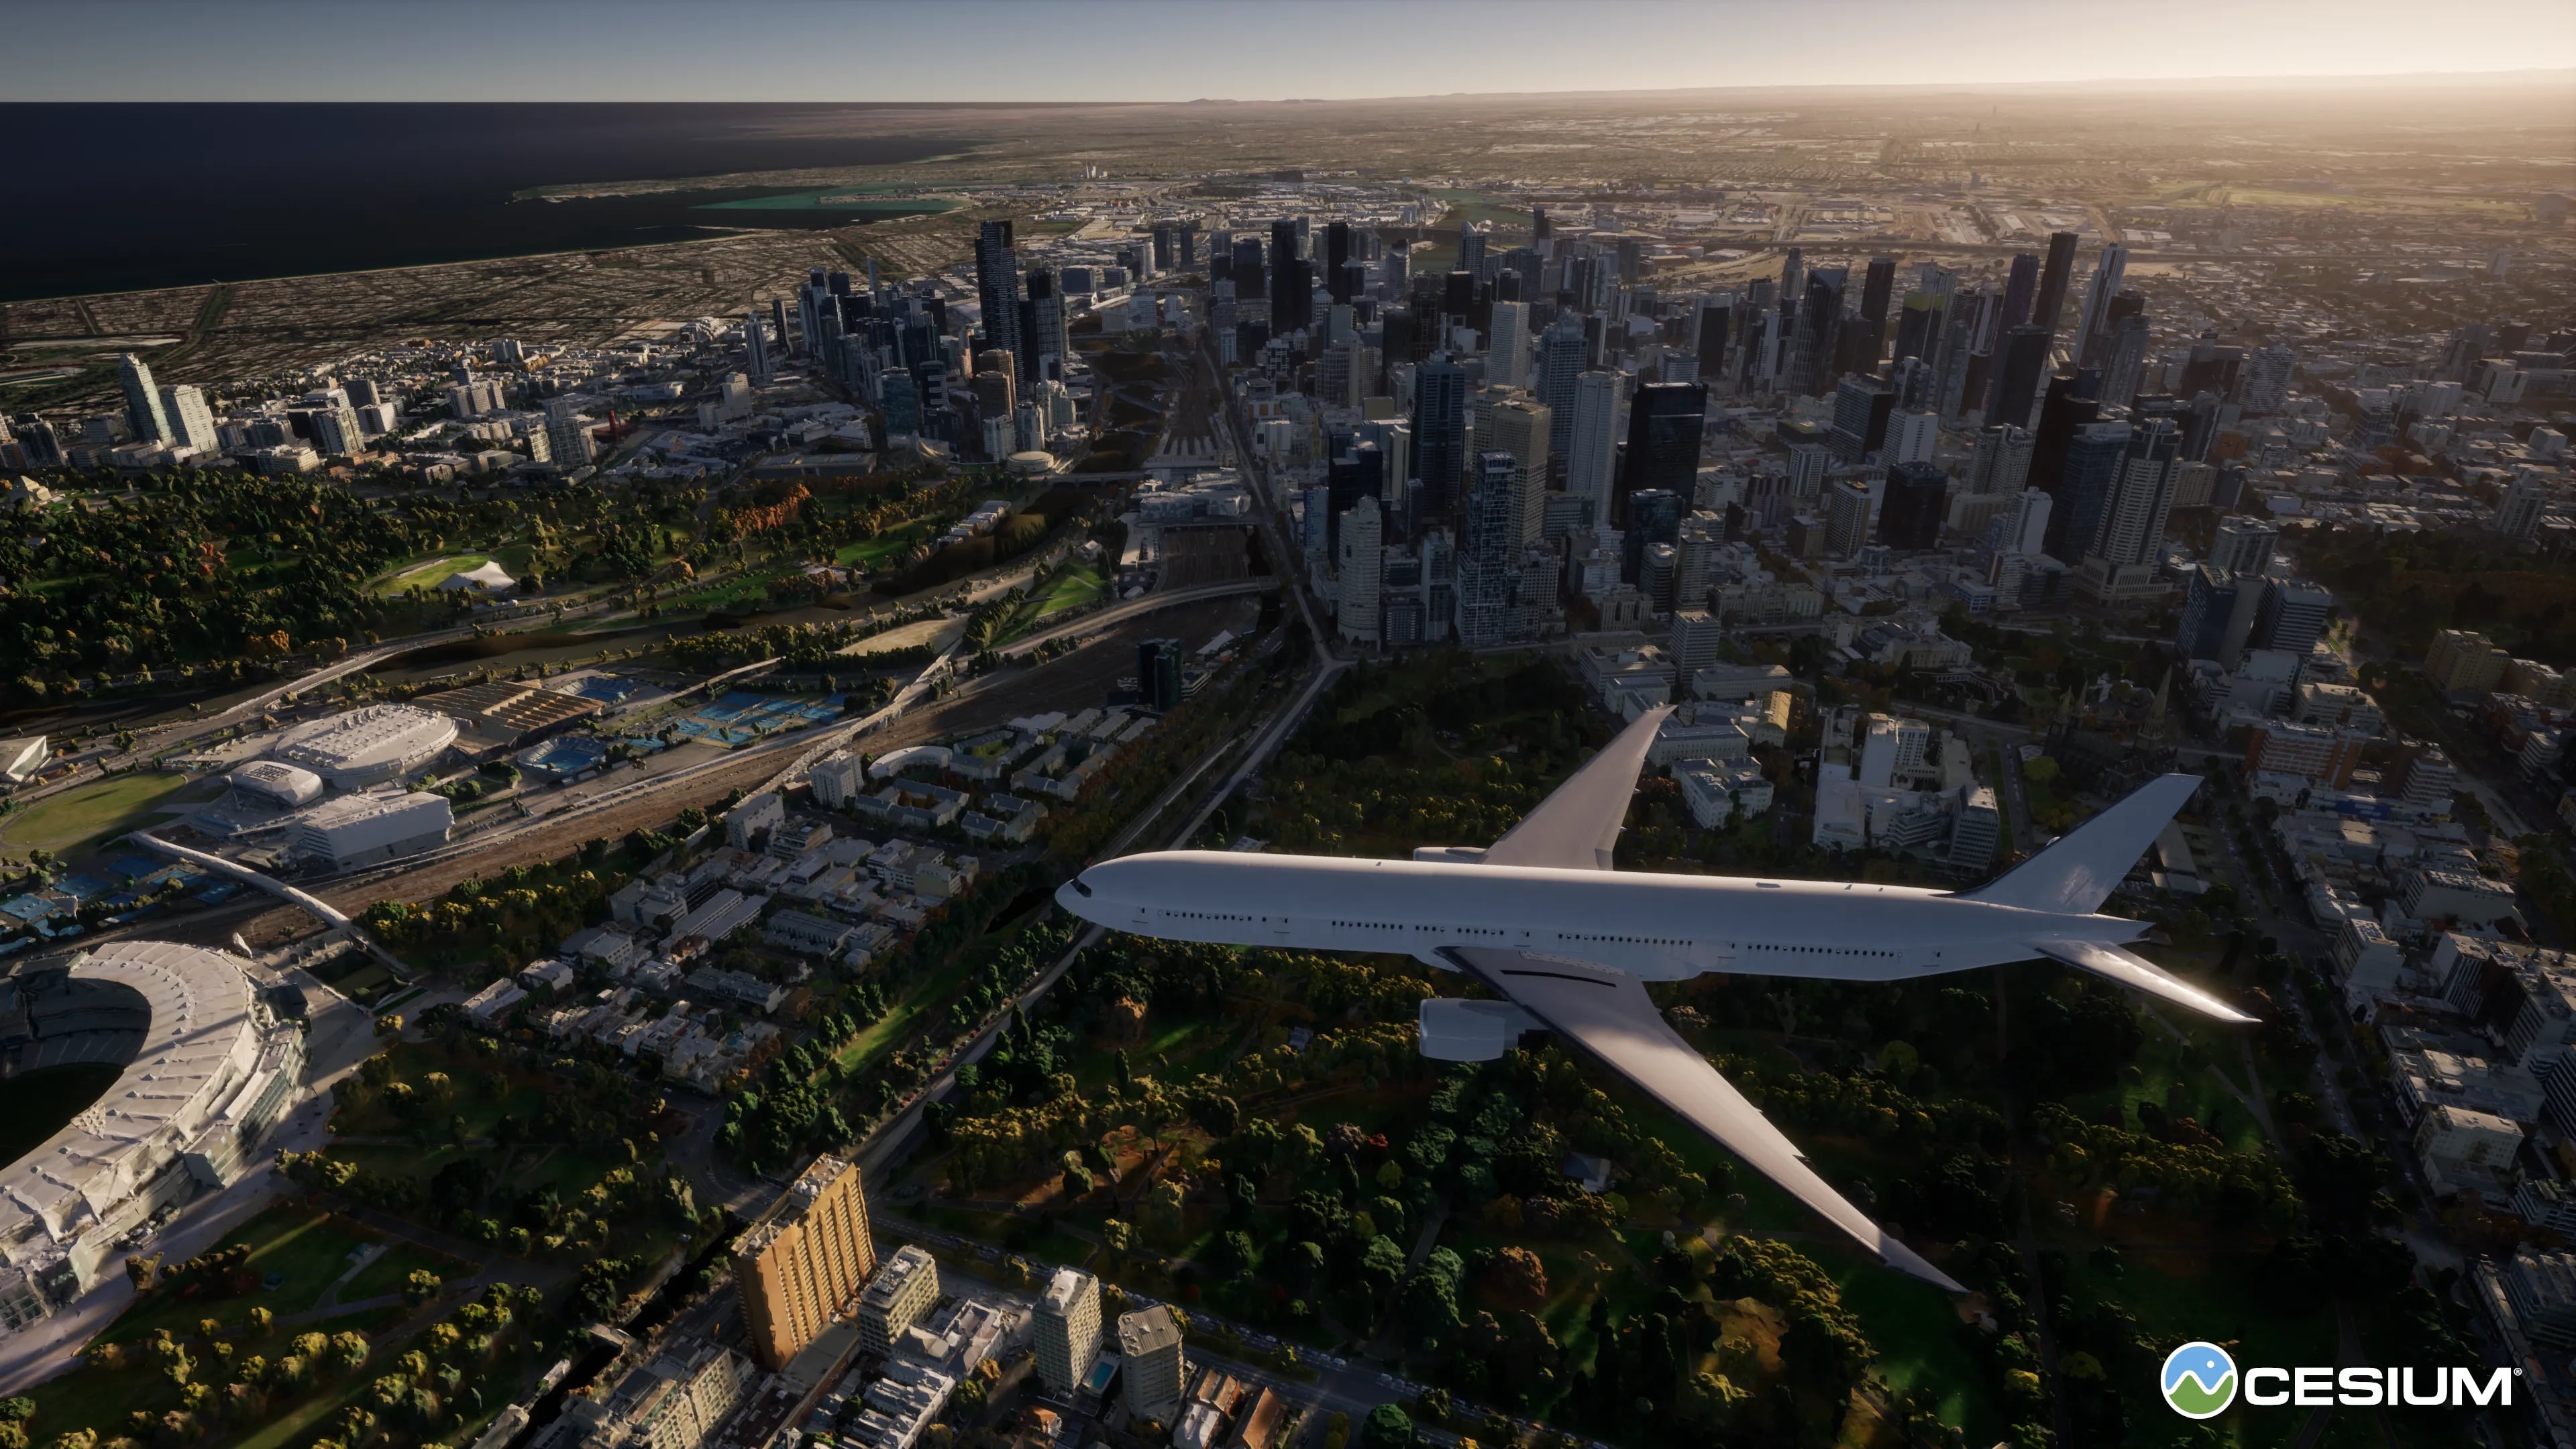 3D model of an airplane interacting with location data of Melbourne, Australia, provided by Aerometrex, a surveying services company, using Cesium's software platform.